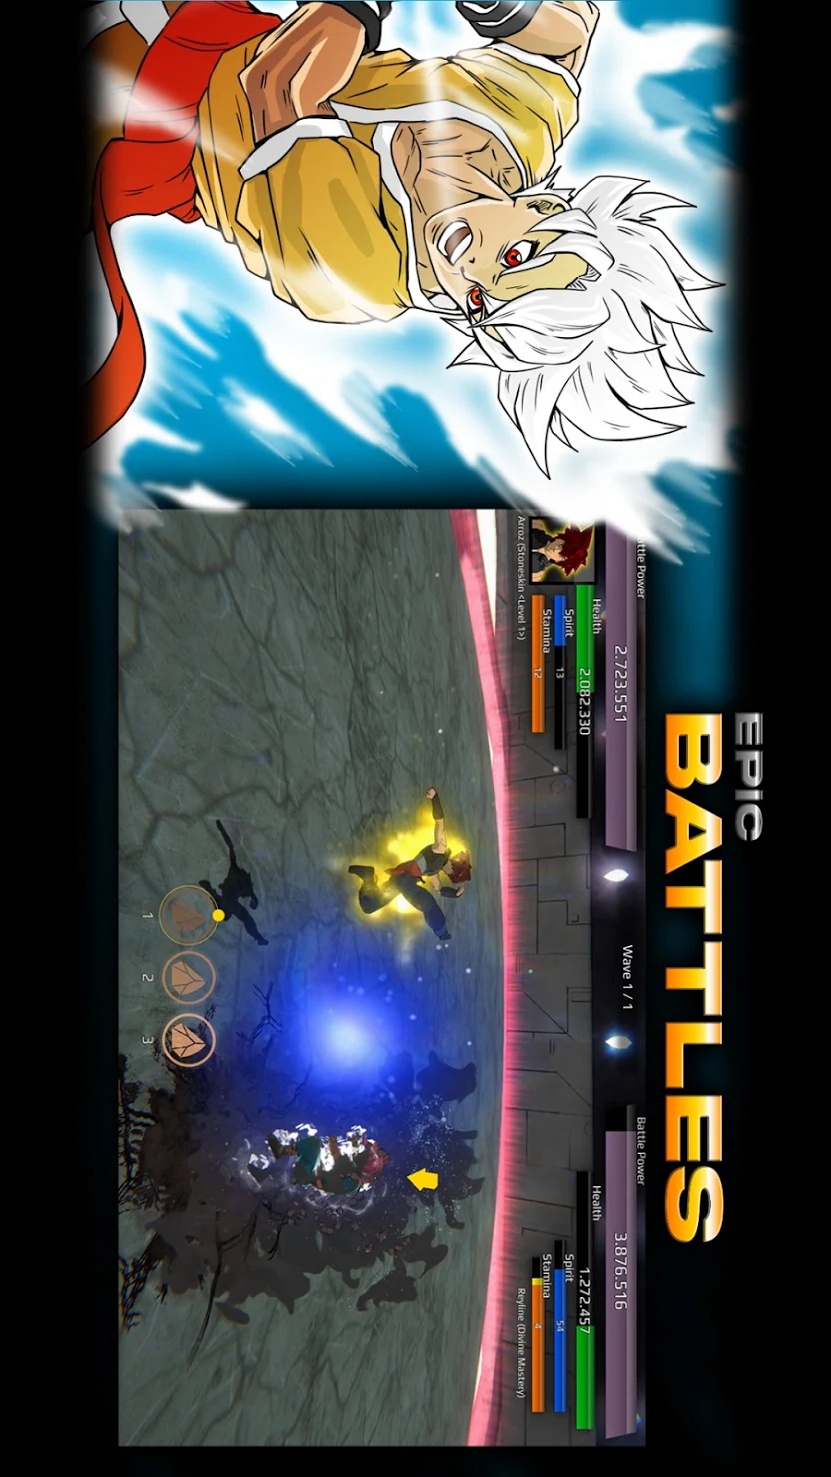 Burst To Power - Anime fighting action RPG(Unlimited Blue upgrade point)